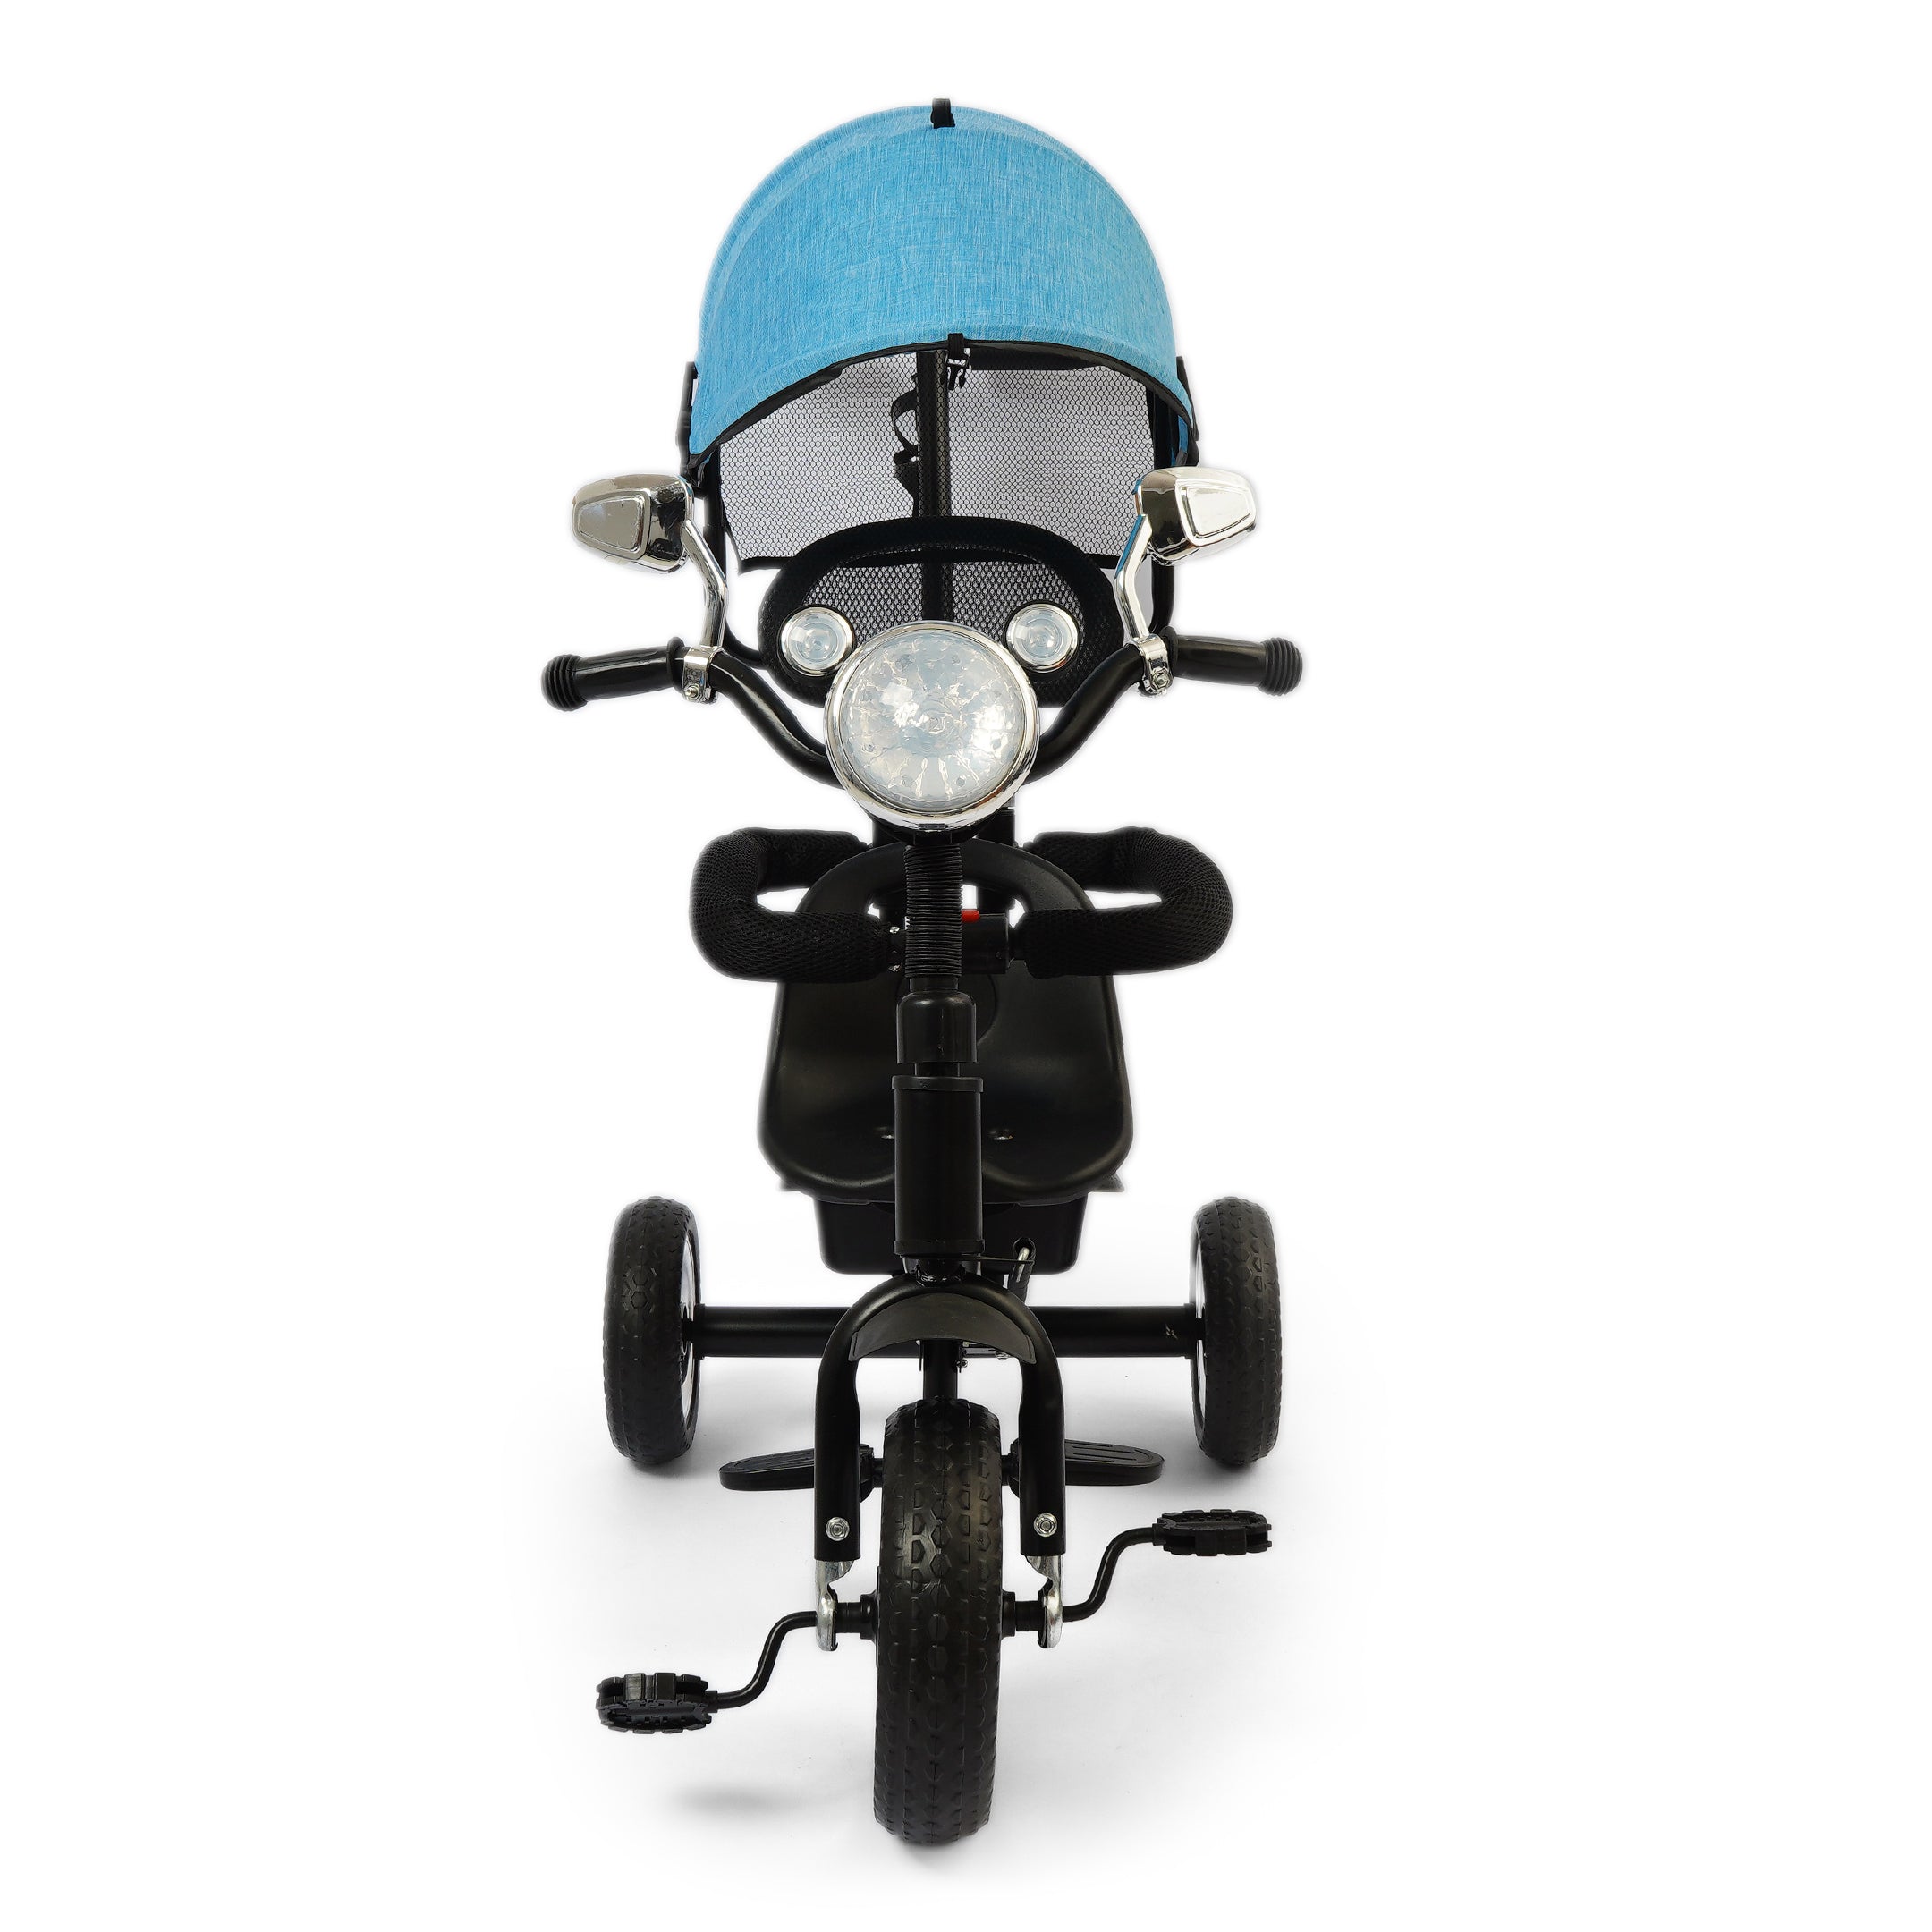 Adorable Headlight Kids Tricycle With Canopy and Push Bar